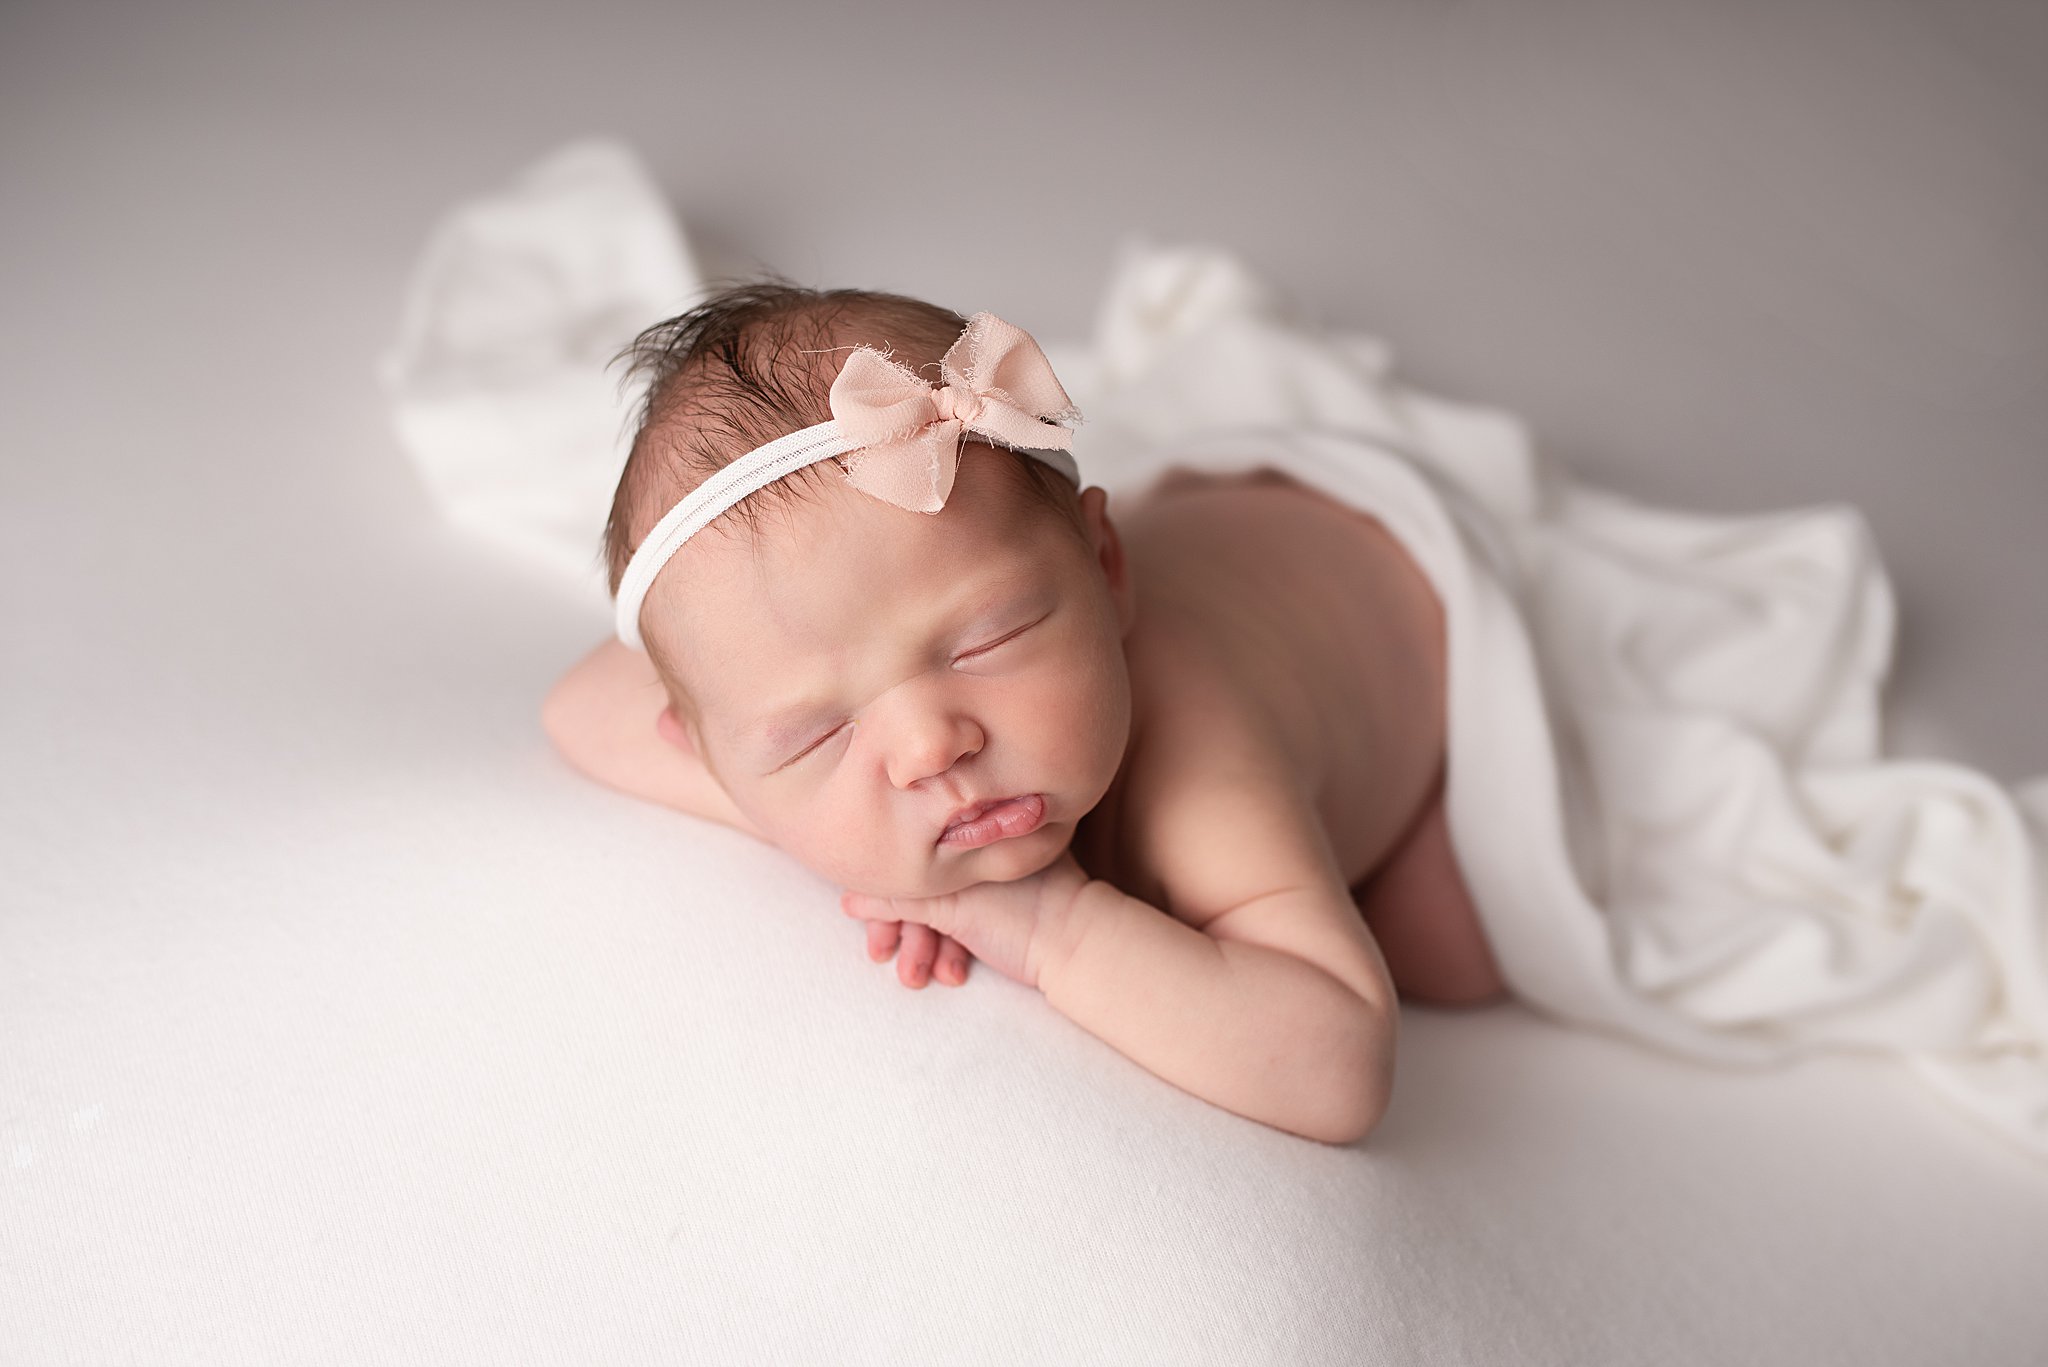 A newborn baby rests her head on her hands while wearing a pink bow headband san diego lactation consultant